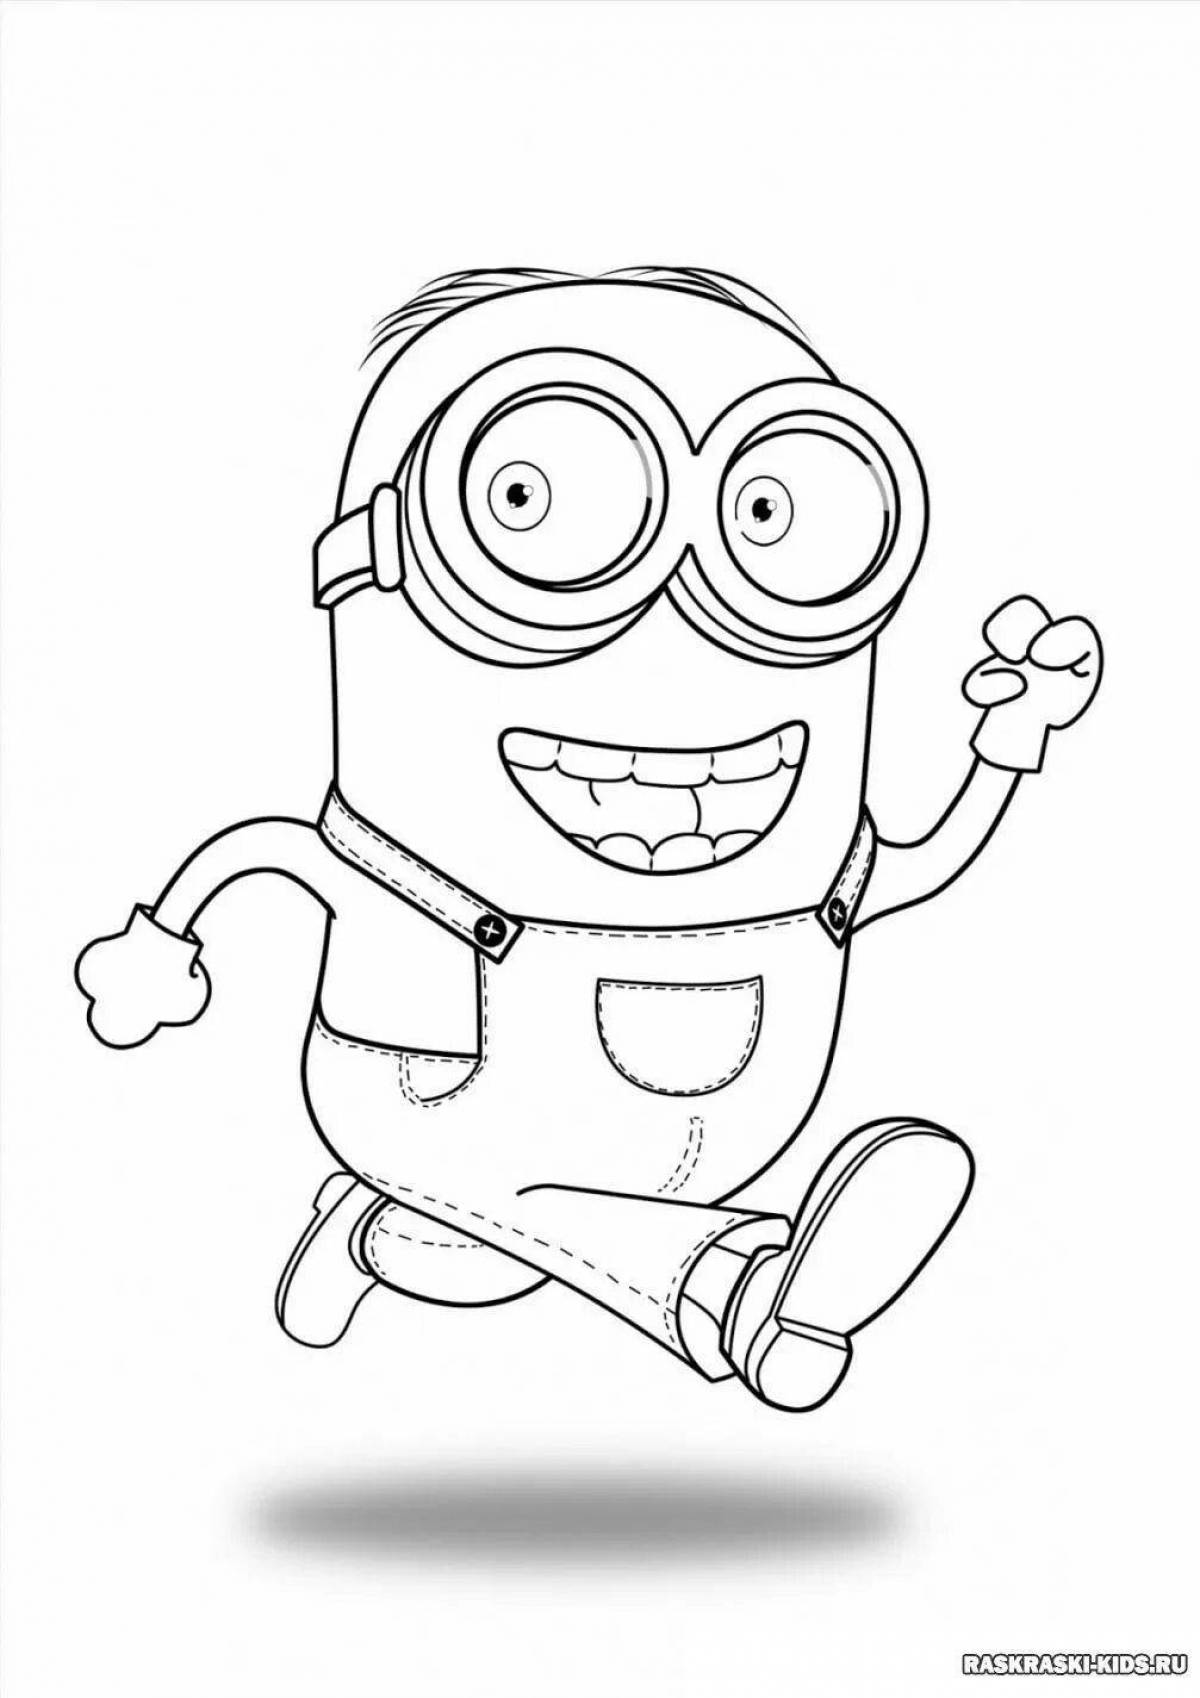 Colorful minion coloring book for kids